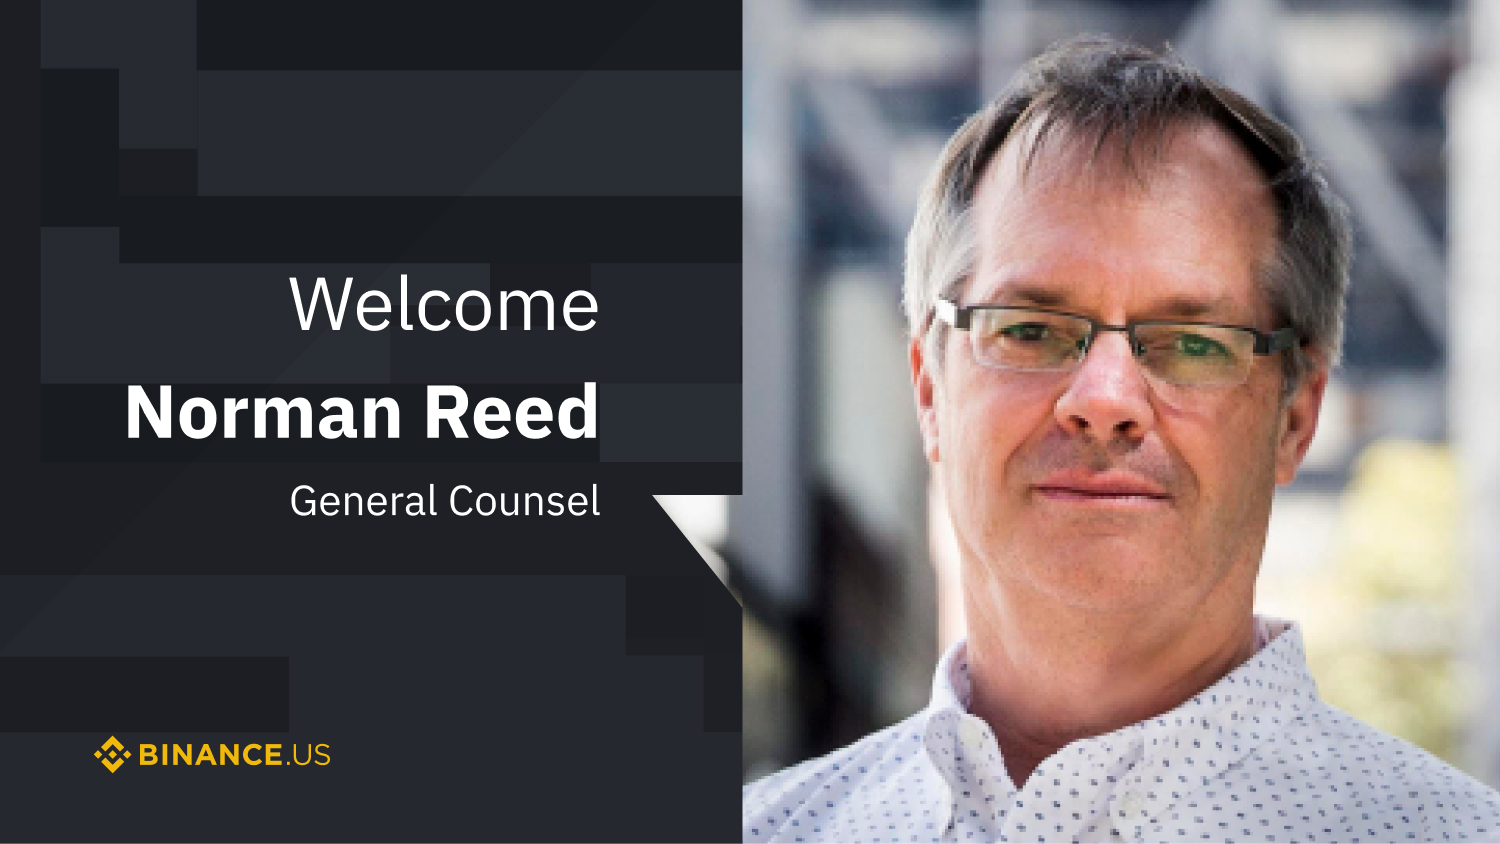 Norman Reed Joins Binance.US as General Counsel